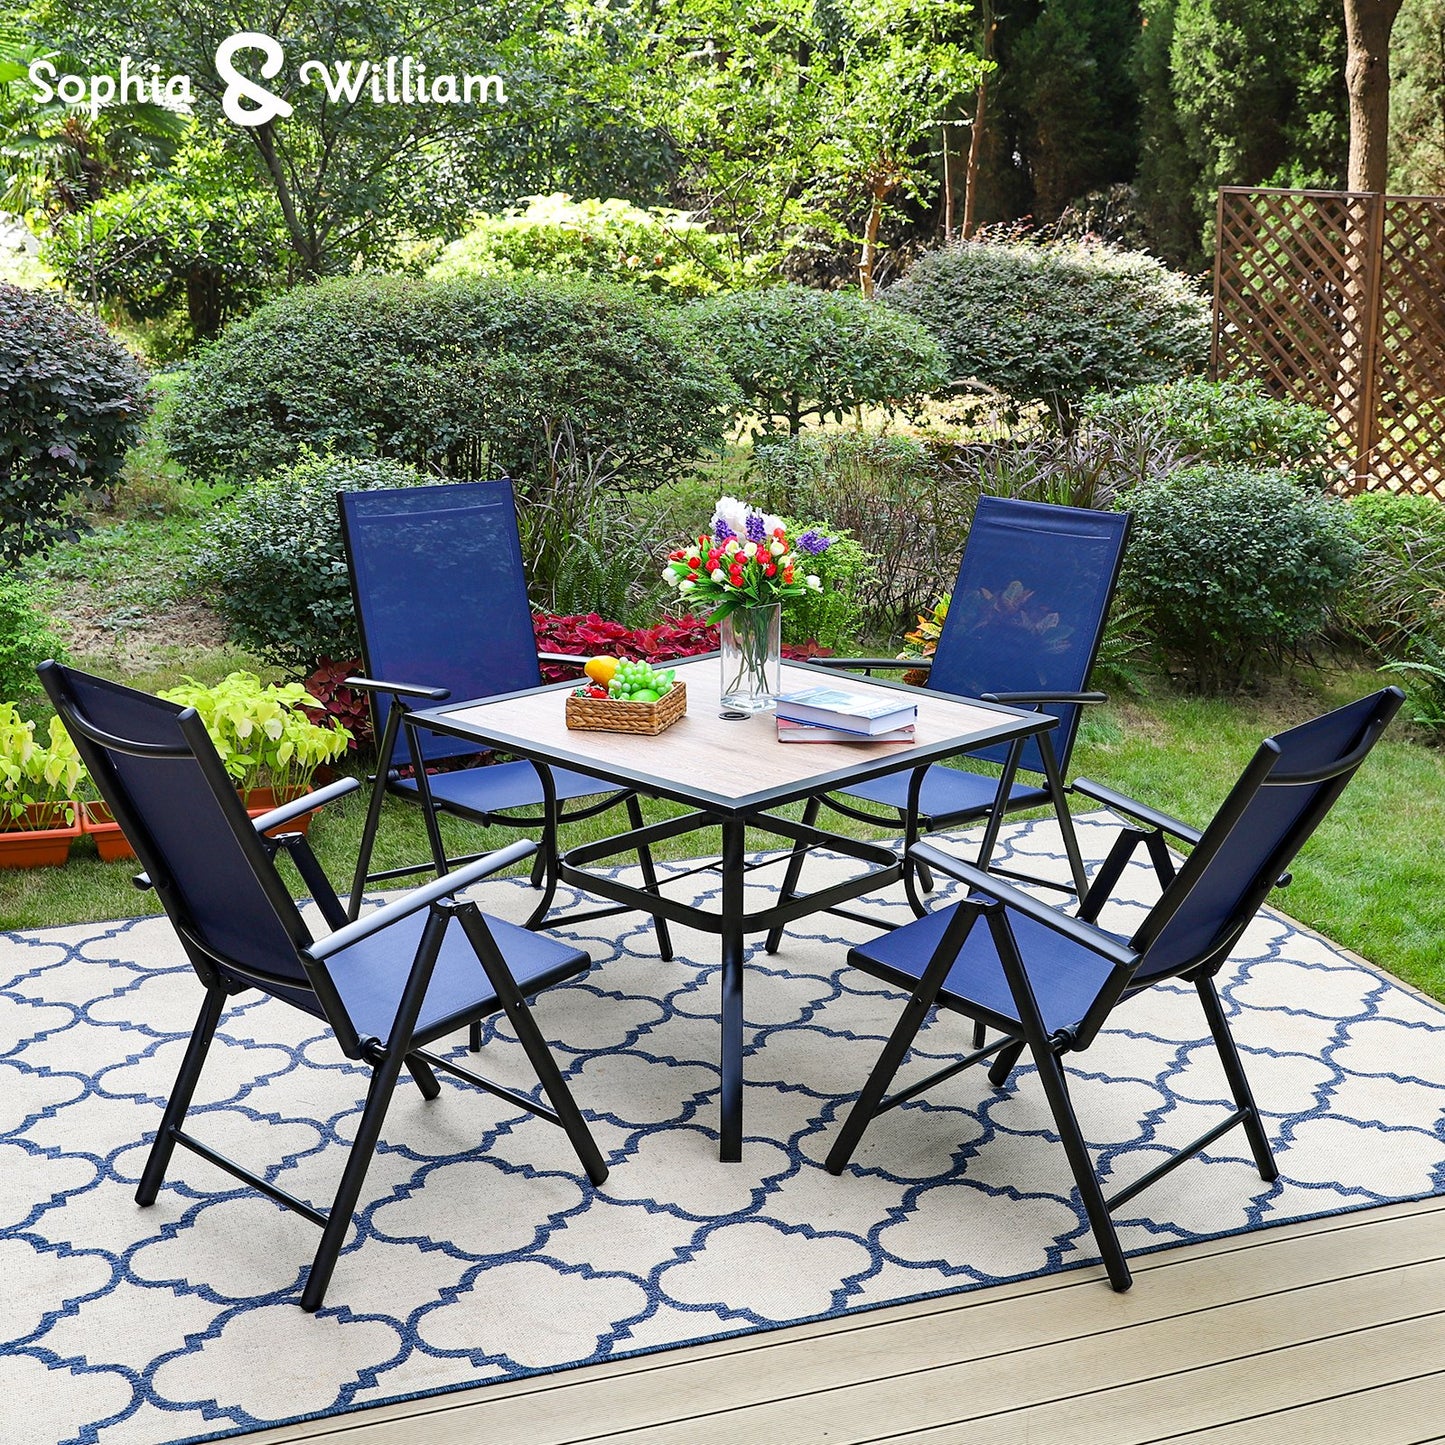 Sophia&William 5Pcs Patio Dining Set Metal Table and Chairs Set for 4 People - Blue